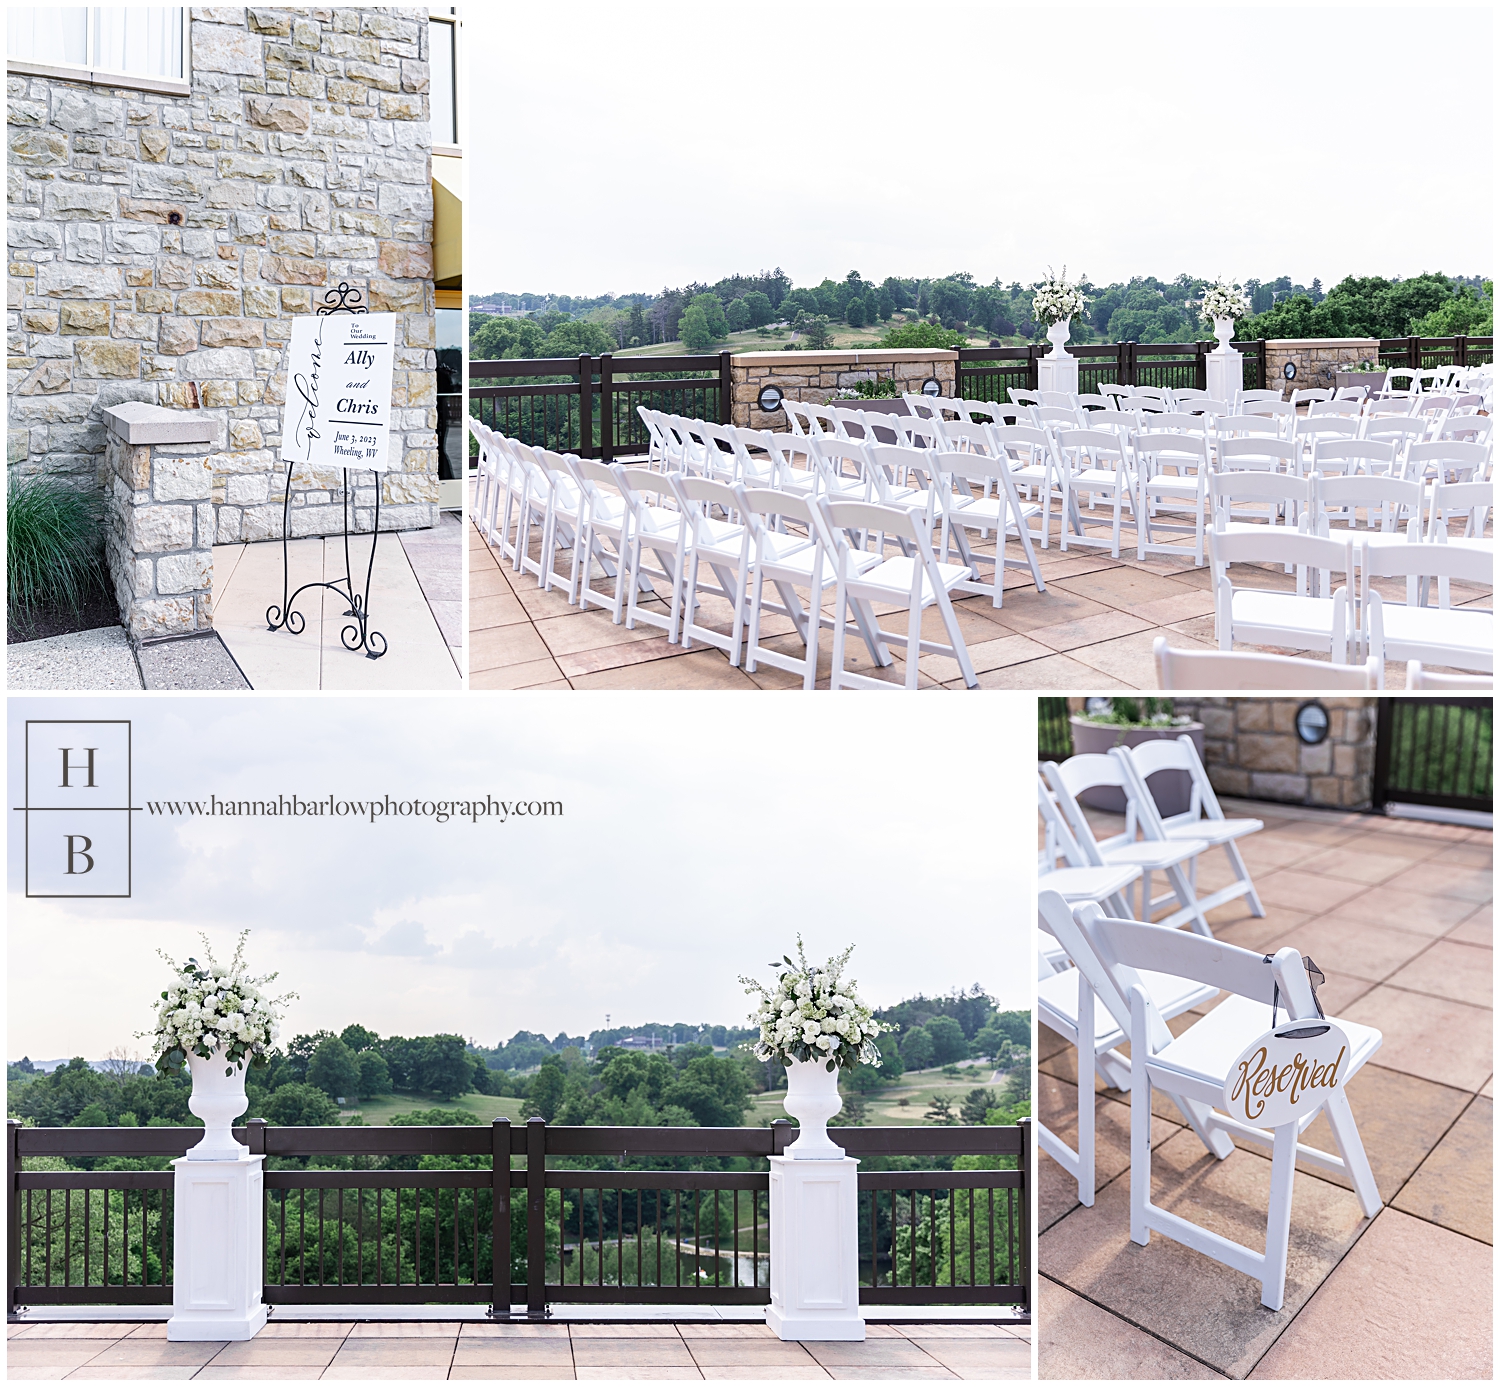 Oglebay West Spa Patio wedding details with white chairs.